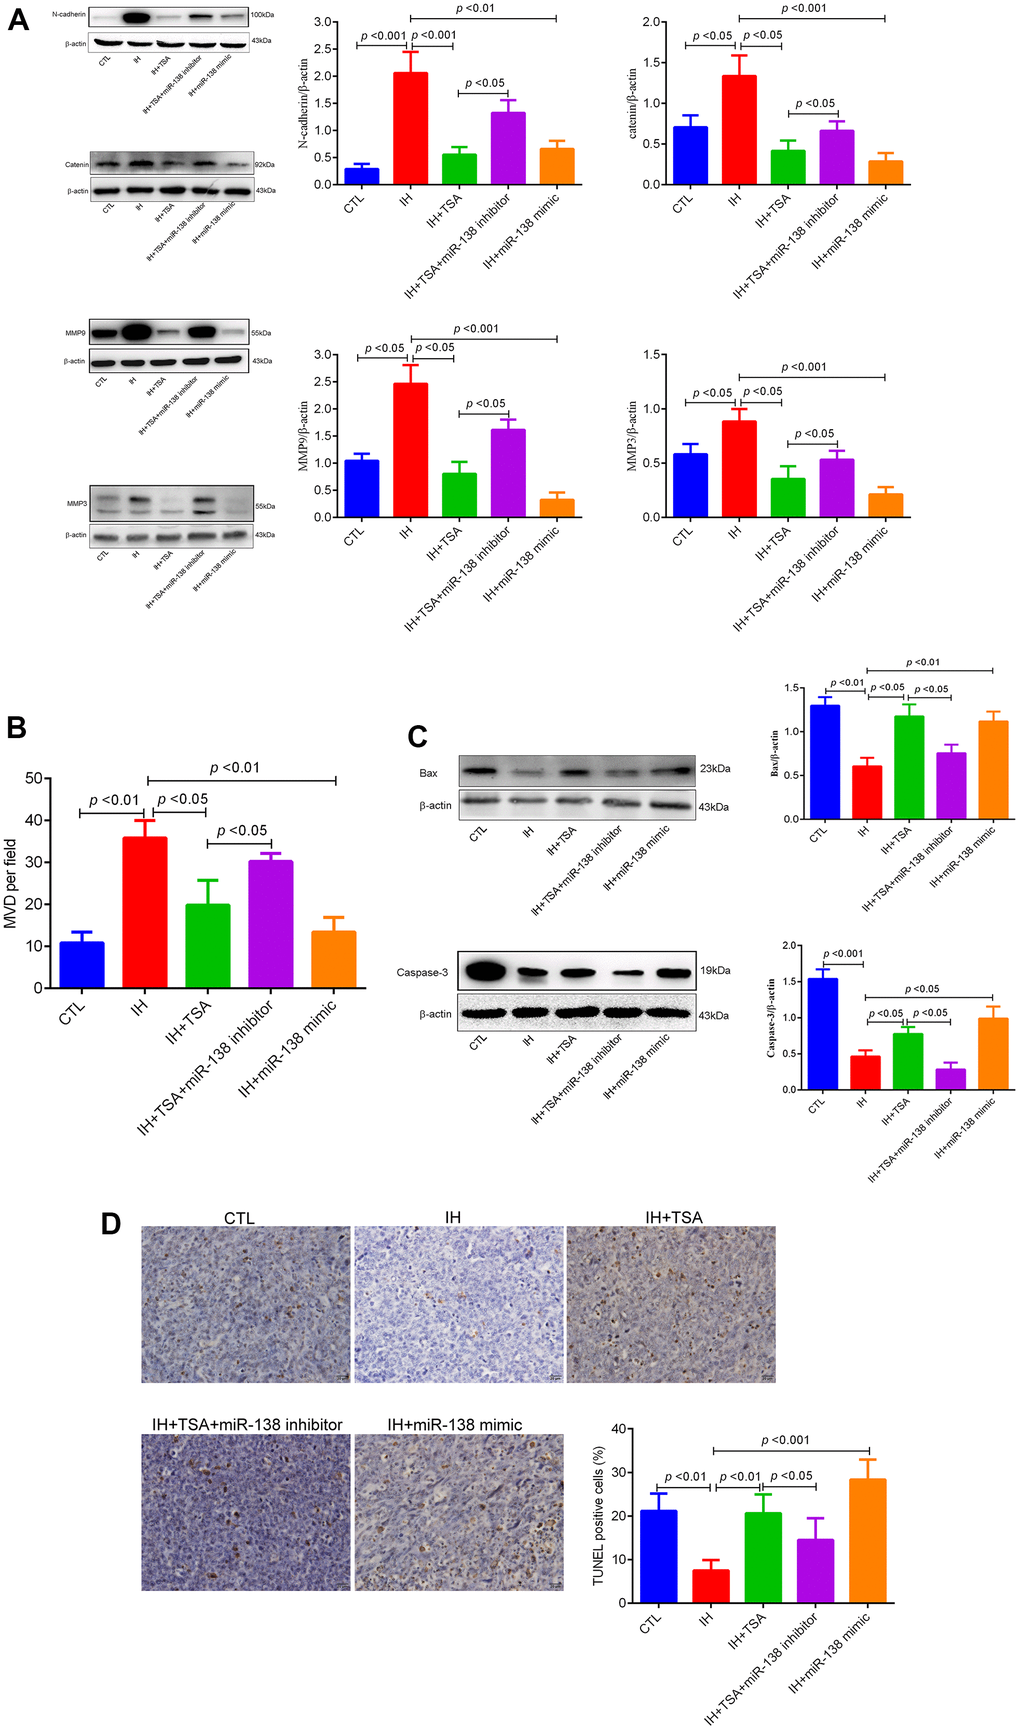 Effects of TSA on tumor migration, invasion, MVD, and apoptosis in IH-exposed xenograft mice. (A) Western blotting of tumor migration and invasion biomarkers, N-cadherin, catenin, MMP9, and MMP3. (B) MVD levels between different groups. (C) Western blotting of apoptosis biomarkers, BAX, and Caspase-3. (D) TUNEL assay images and results between different groups.